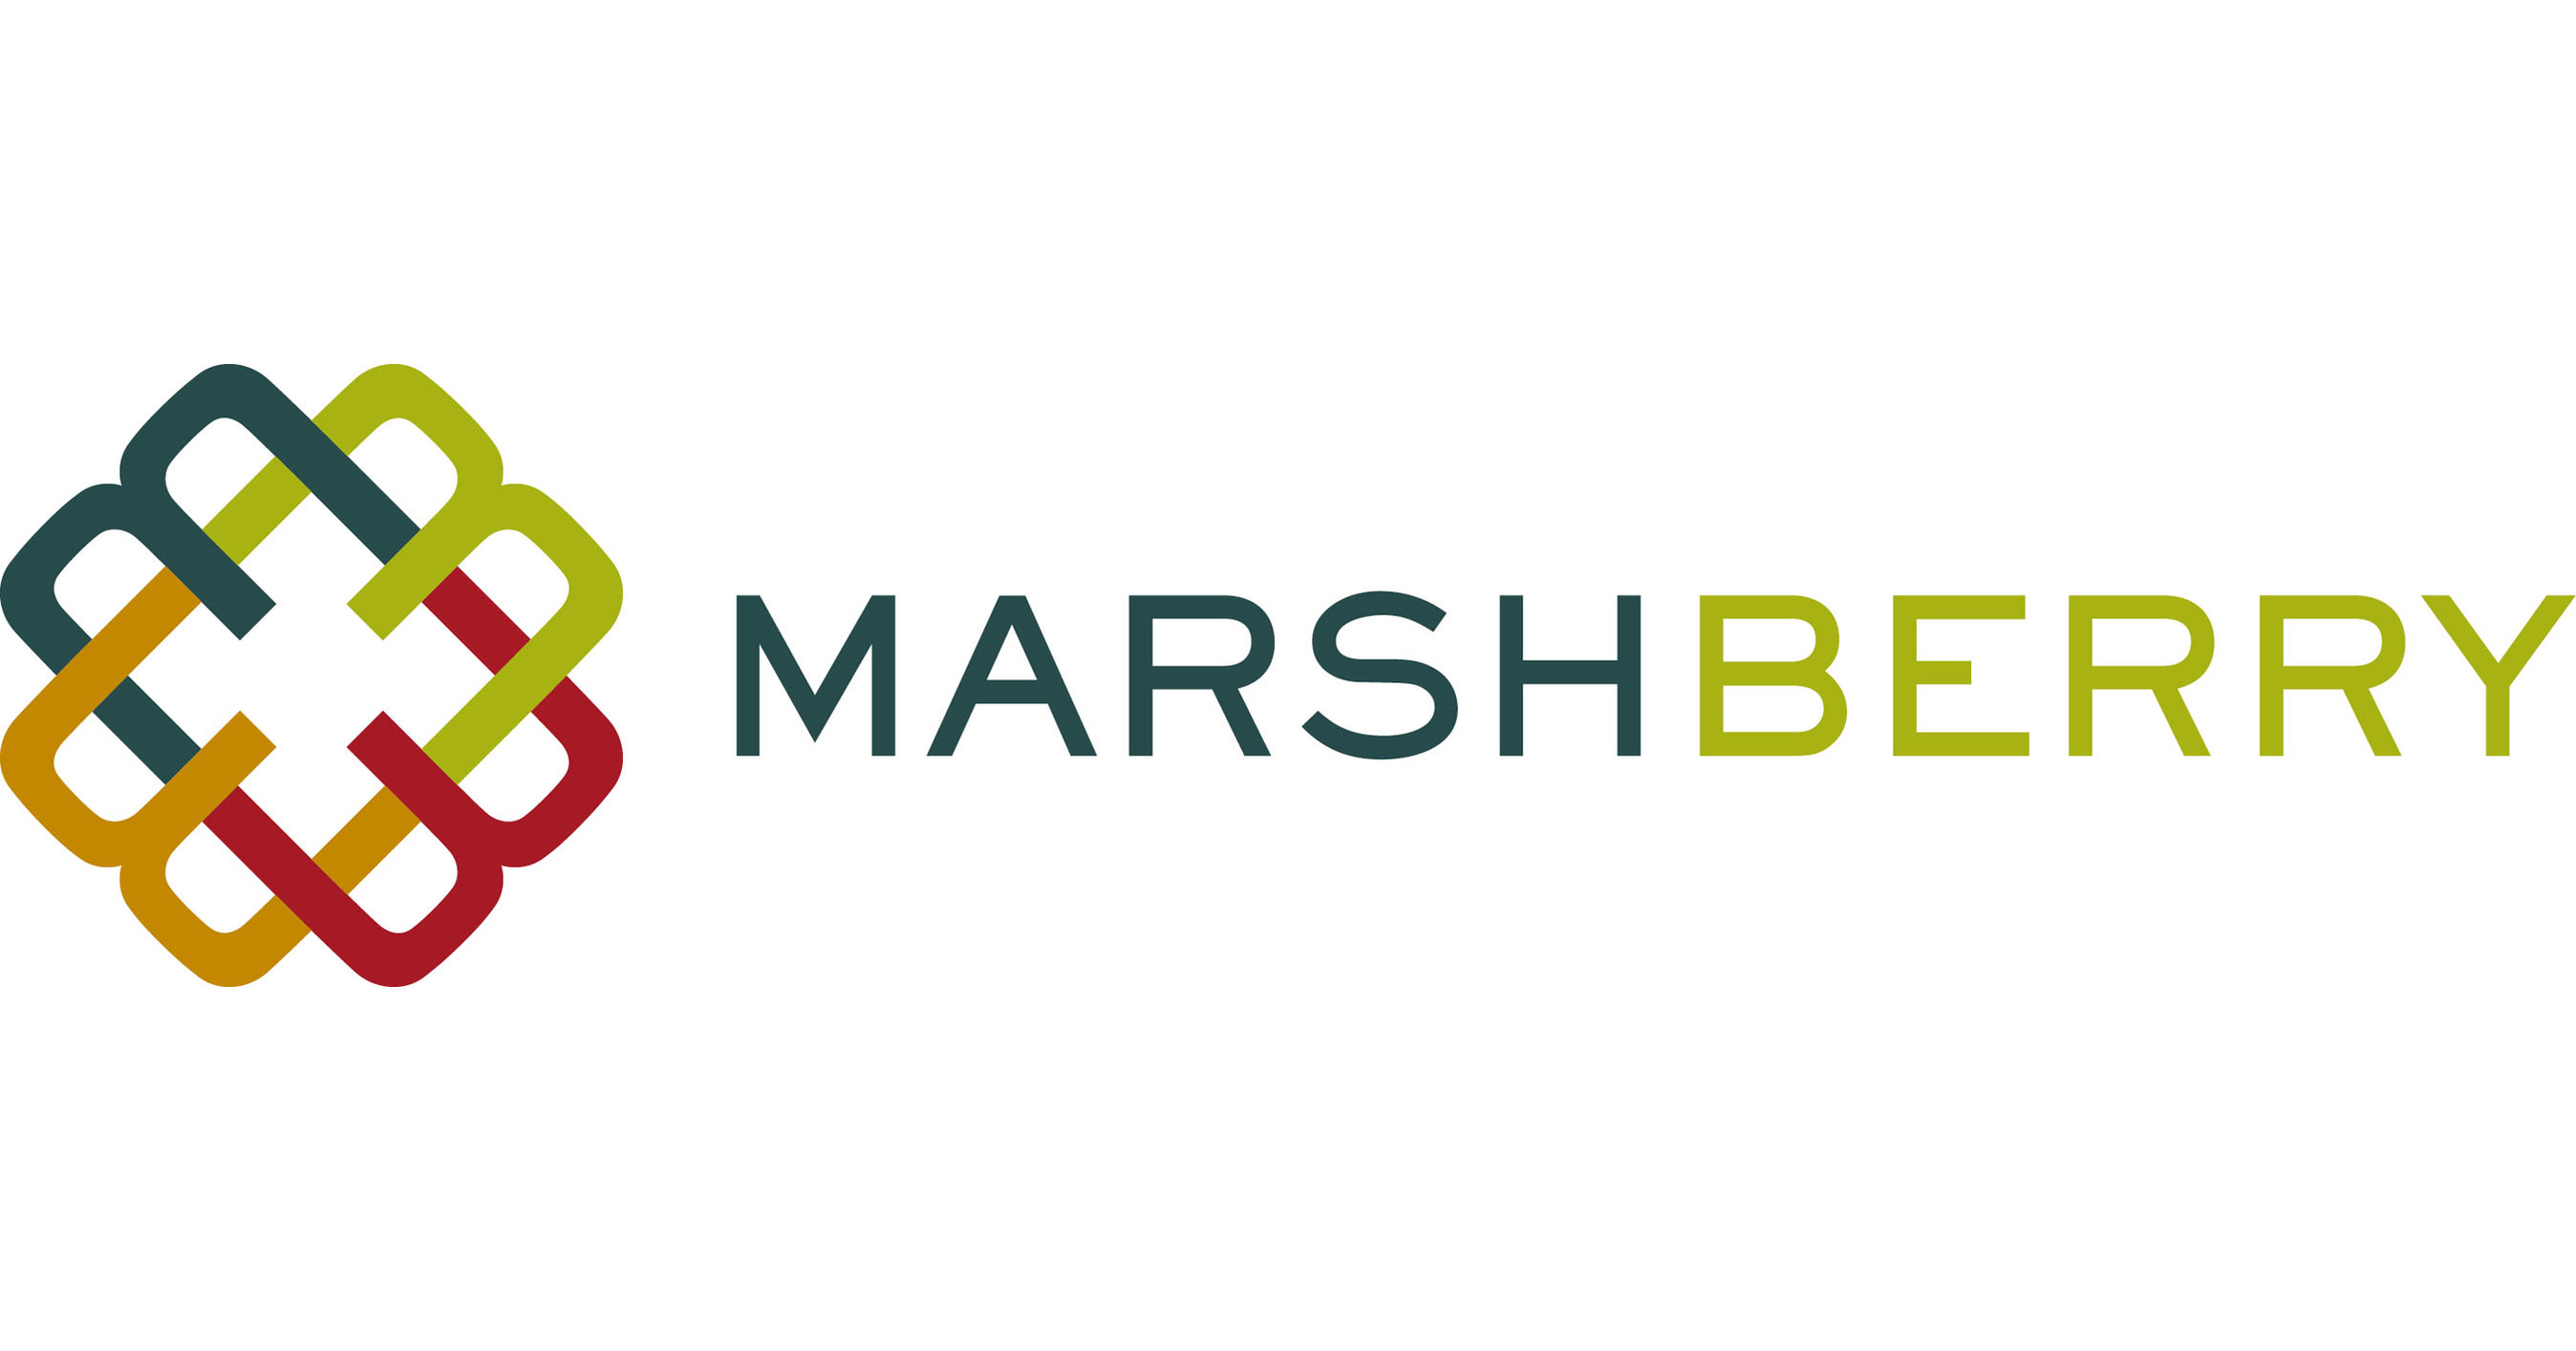 MARSHBERRY SECURES GROWTH CAPITAL FROM ATLAST MERCHANT CAPITAL